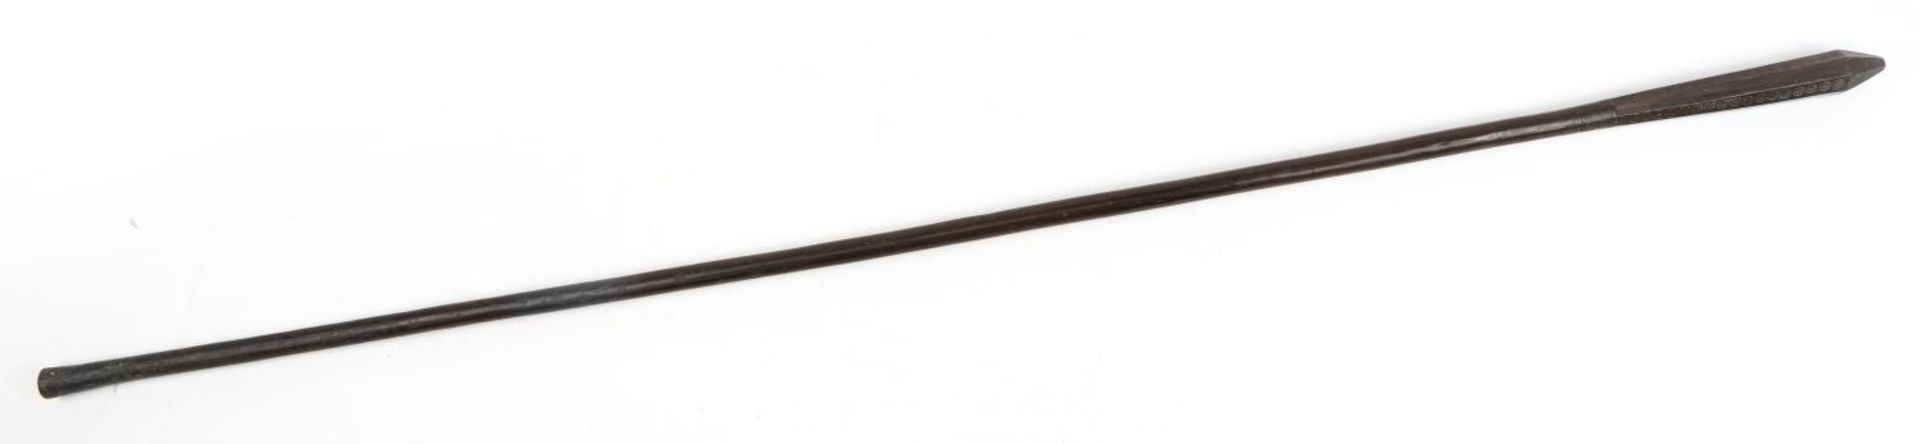 Tribal interest hardwood club, possibly Tongan, 137.5cm in length - Image 2 of 5